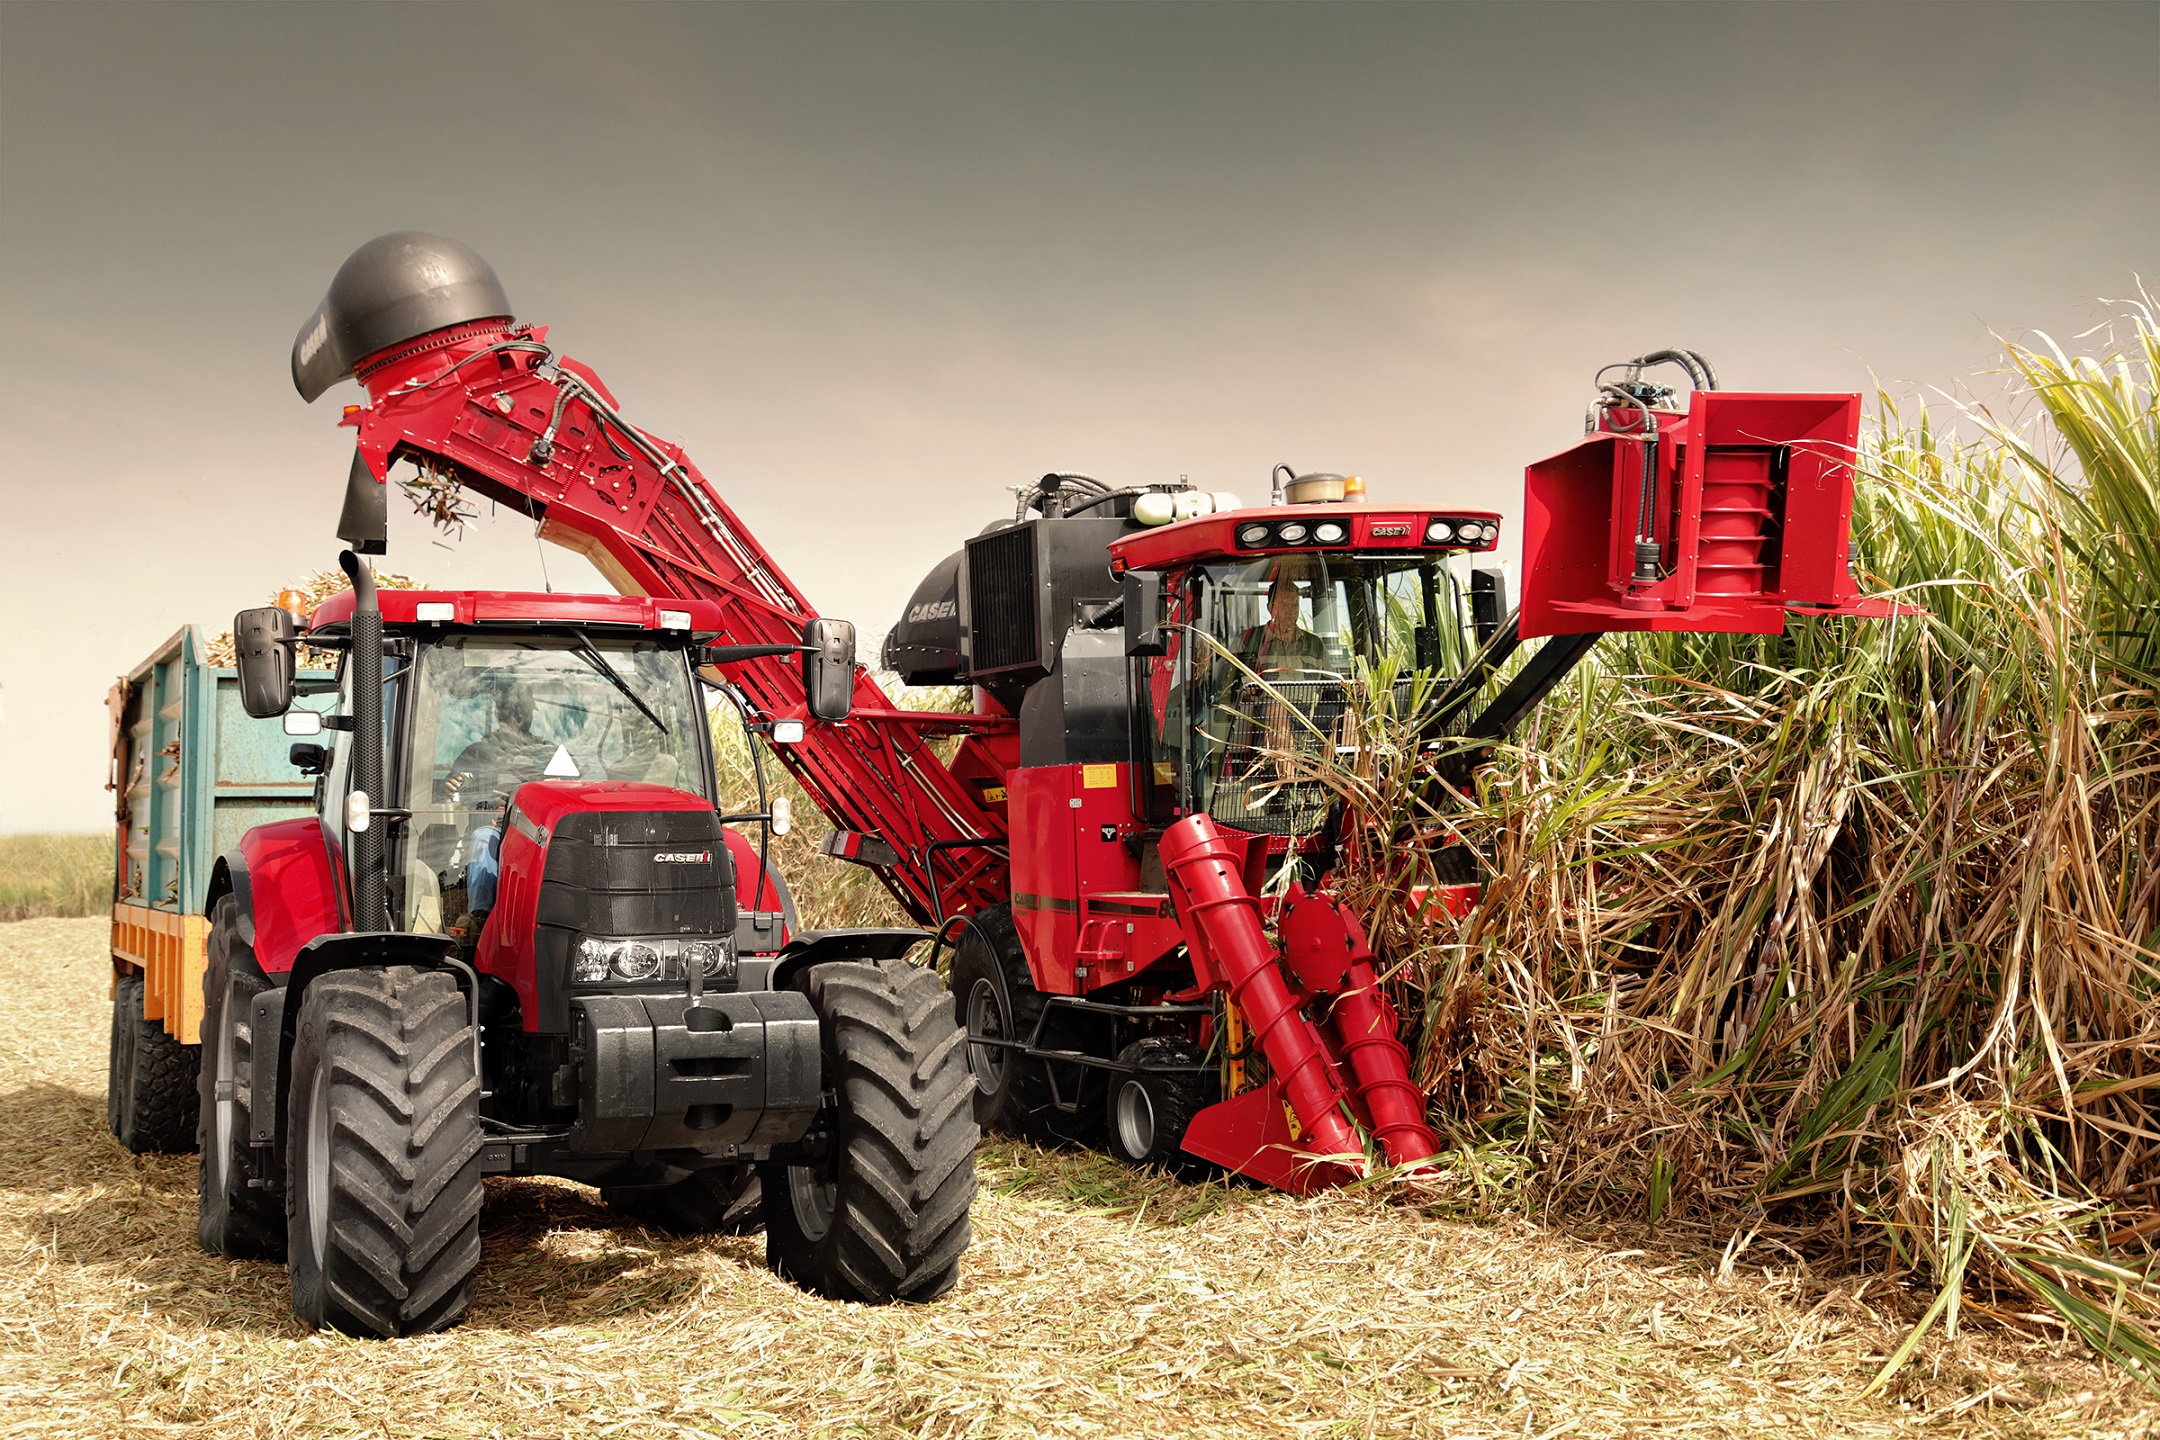 CASE IH GIVES AN INSIGHT INTO THE MODERNIZATION AND MECHANIZATION OF FARMING